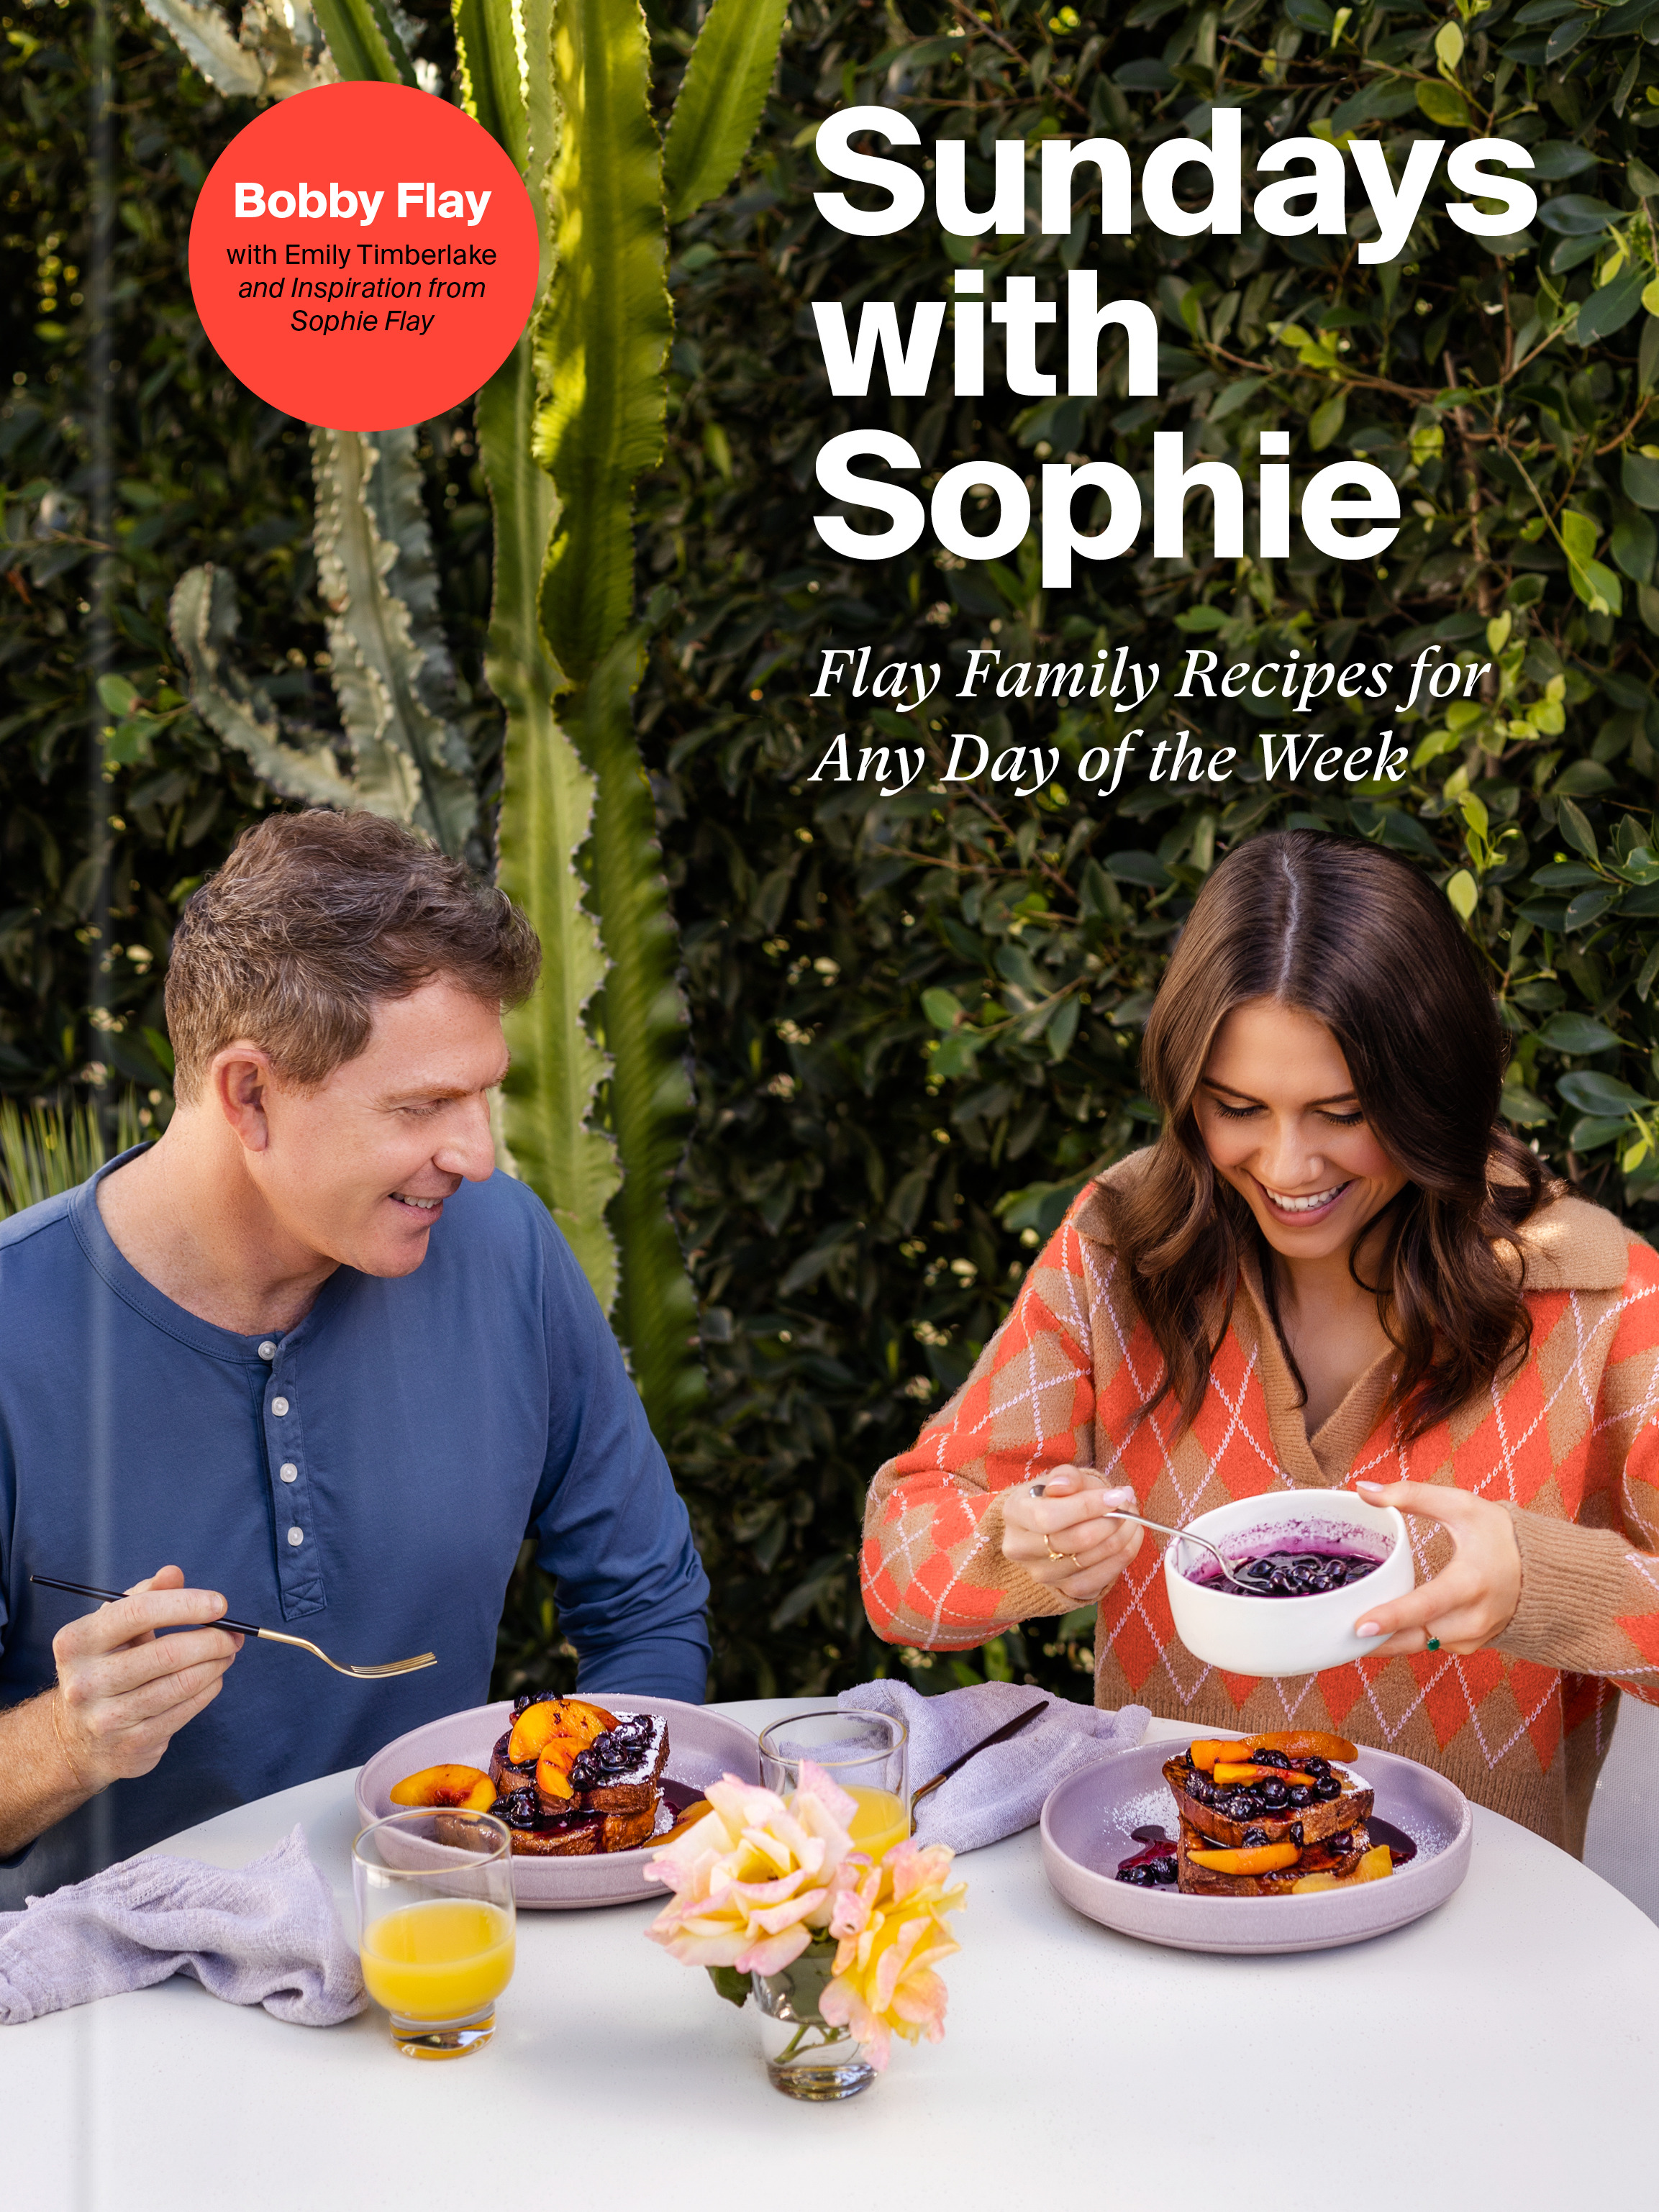 Sundays with Sophie : Flay Family Recipes for Any Day of the Week: A Bobby Flay Cookbook | Flay, Bobby